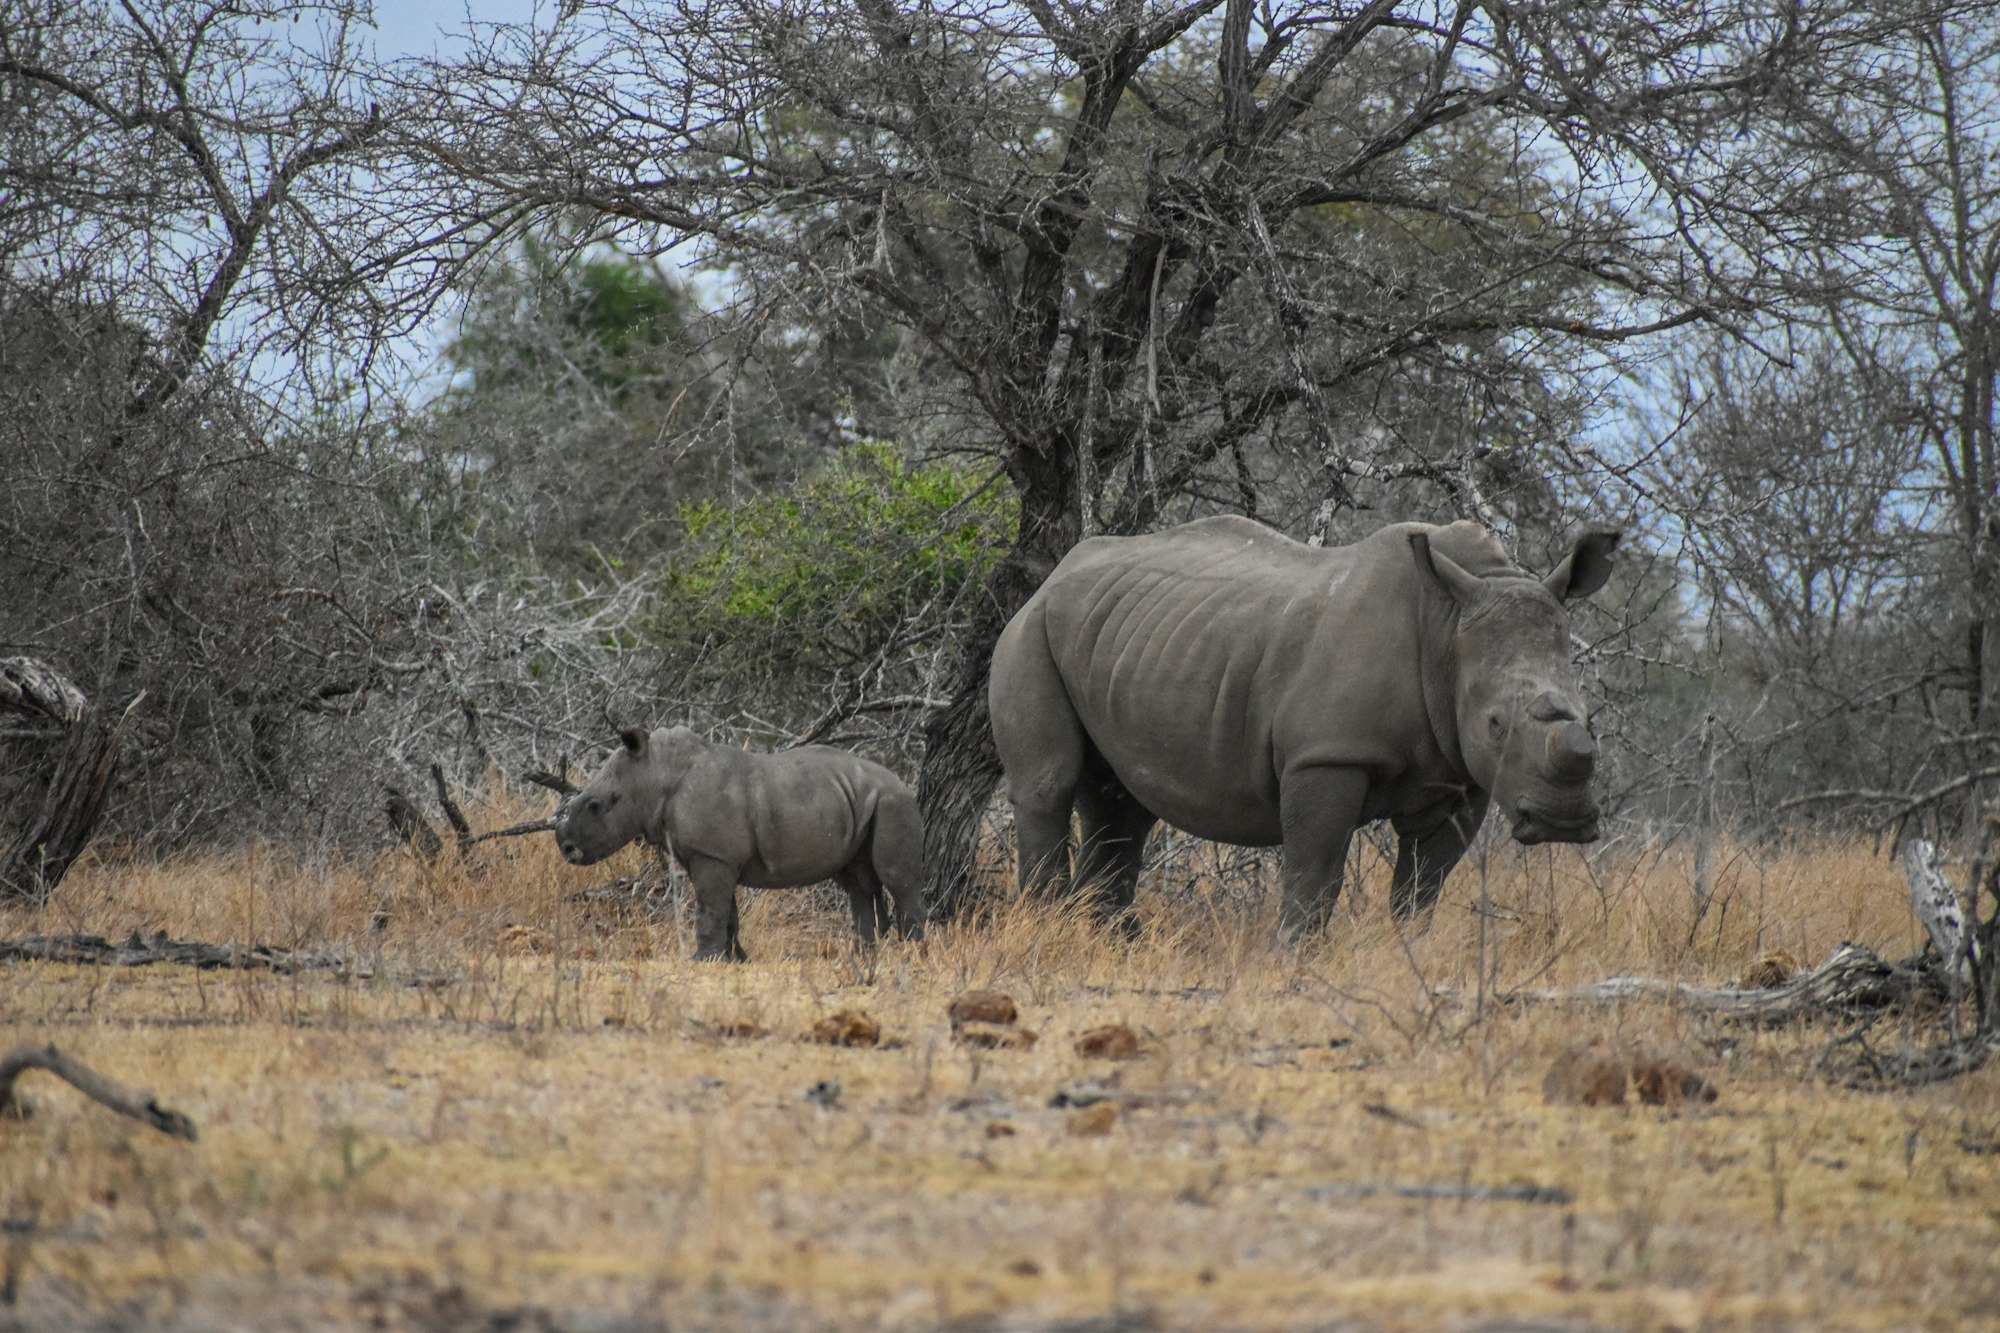 White Rhinoceros with baby, being protected from poachers. Shot in the Kruger National Park, South Africa.